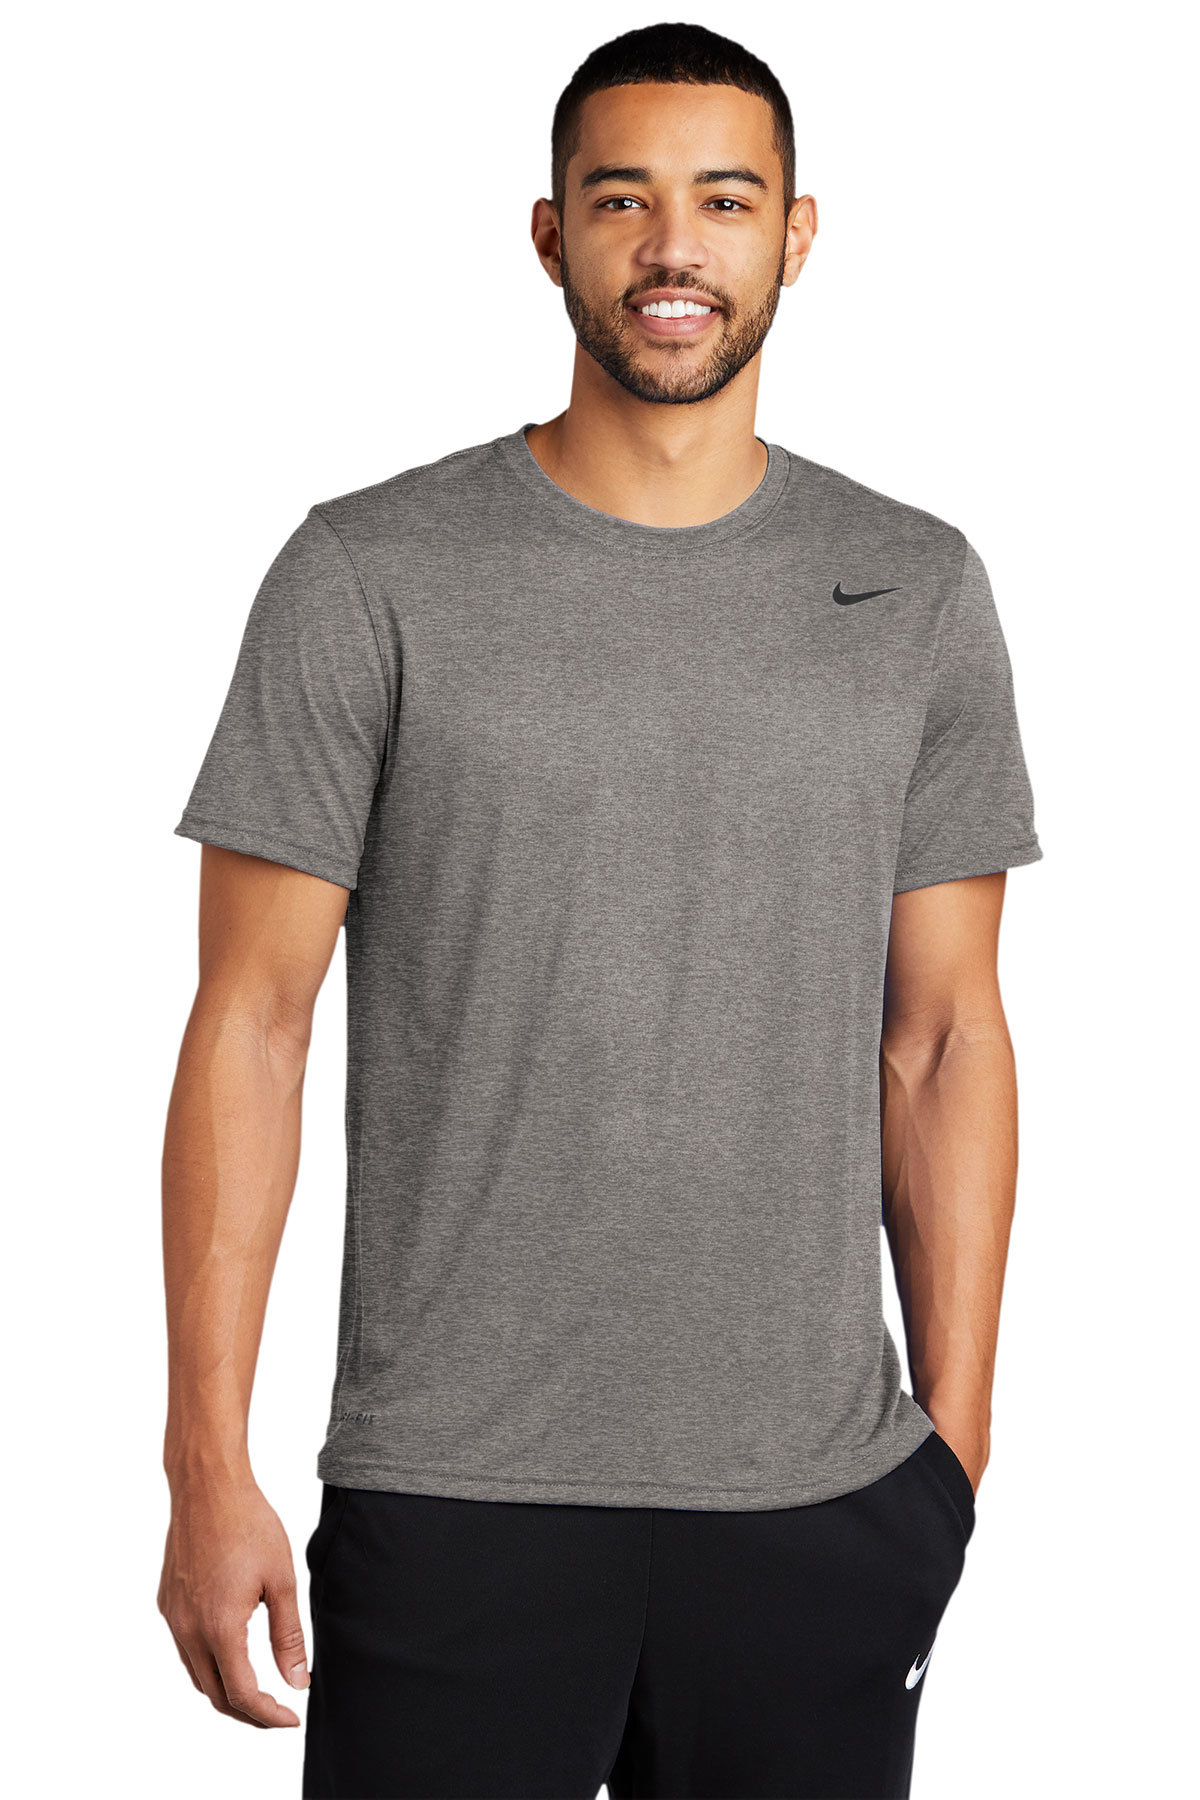 Nike Legend Tee | Product | Company Casuals